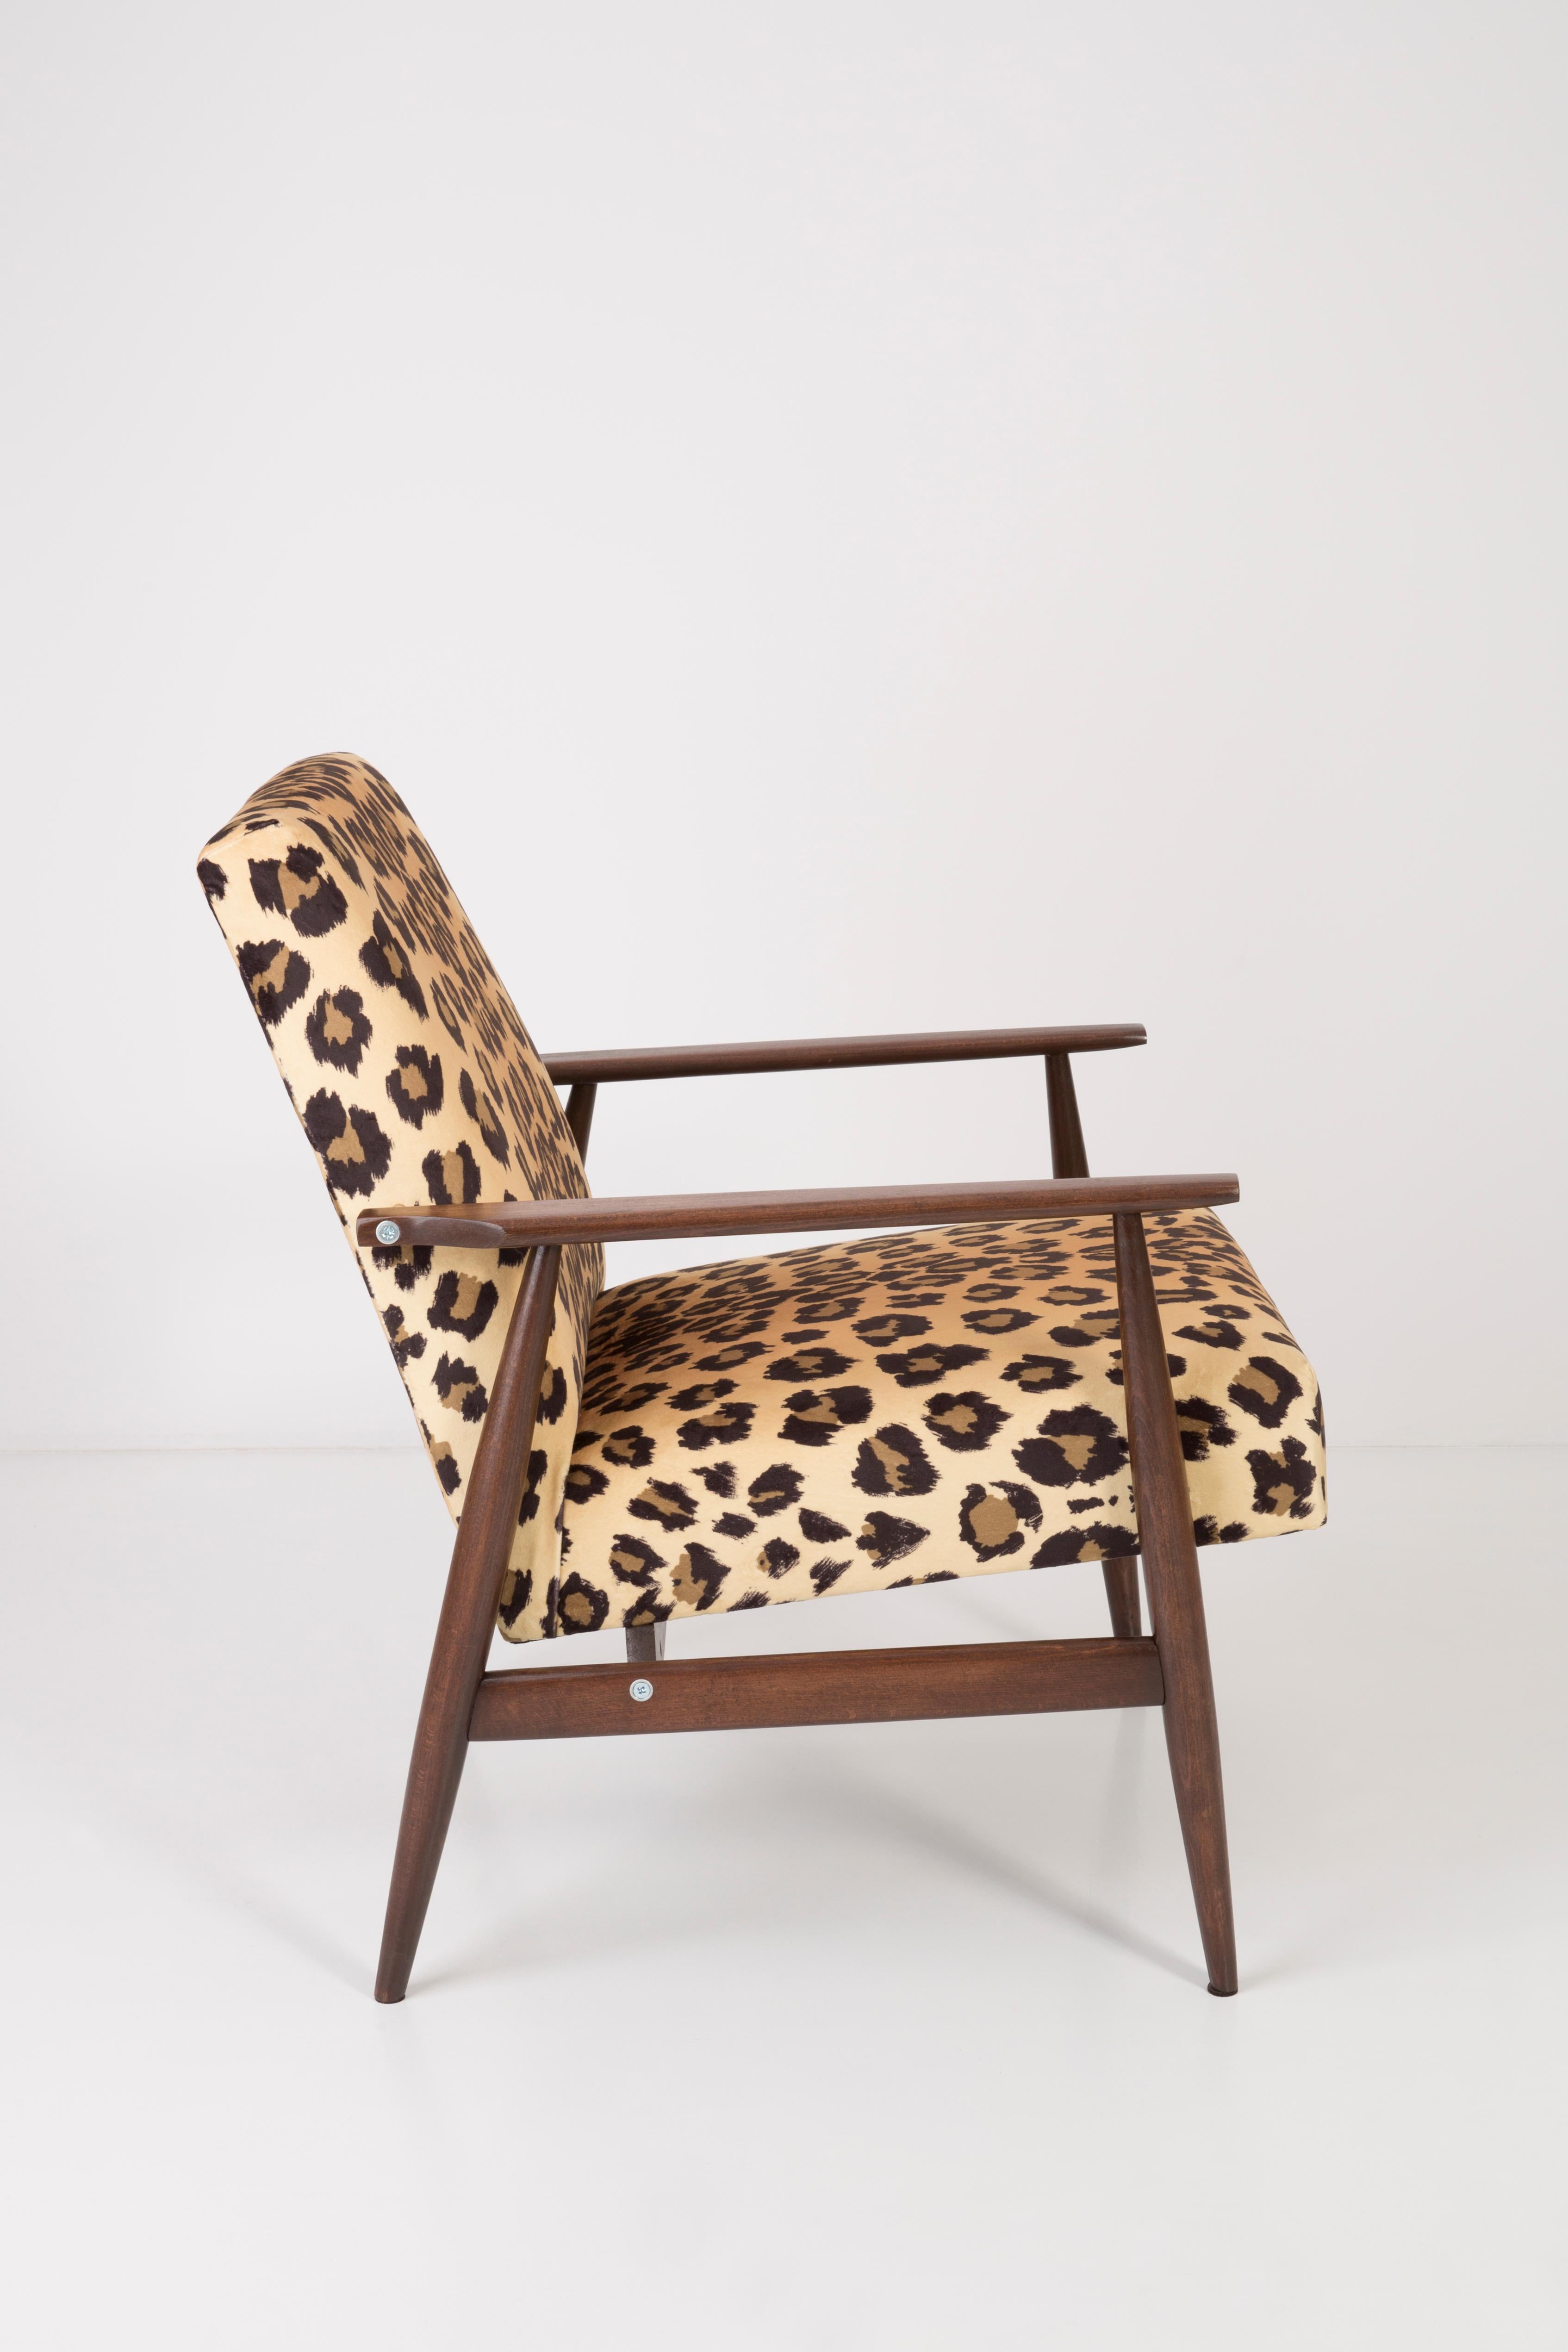 A beautiful, restored armchair designed by Henryk Lis. Furniture after full carpentry and upholstery renovation. The fabric, which is covered with a backrest and a seat, is a high-quality Italian velvet upholstery printed in leopard pattern. The